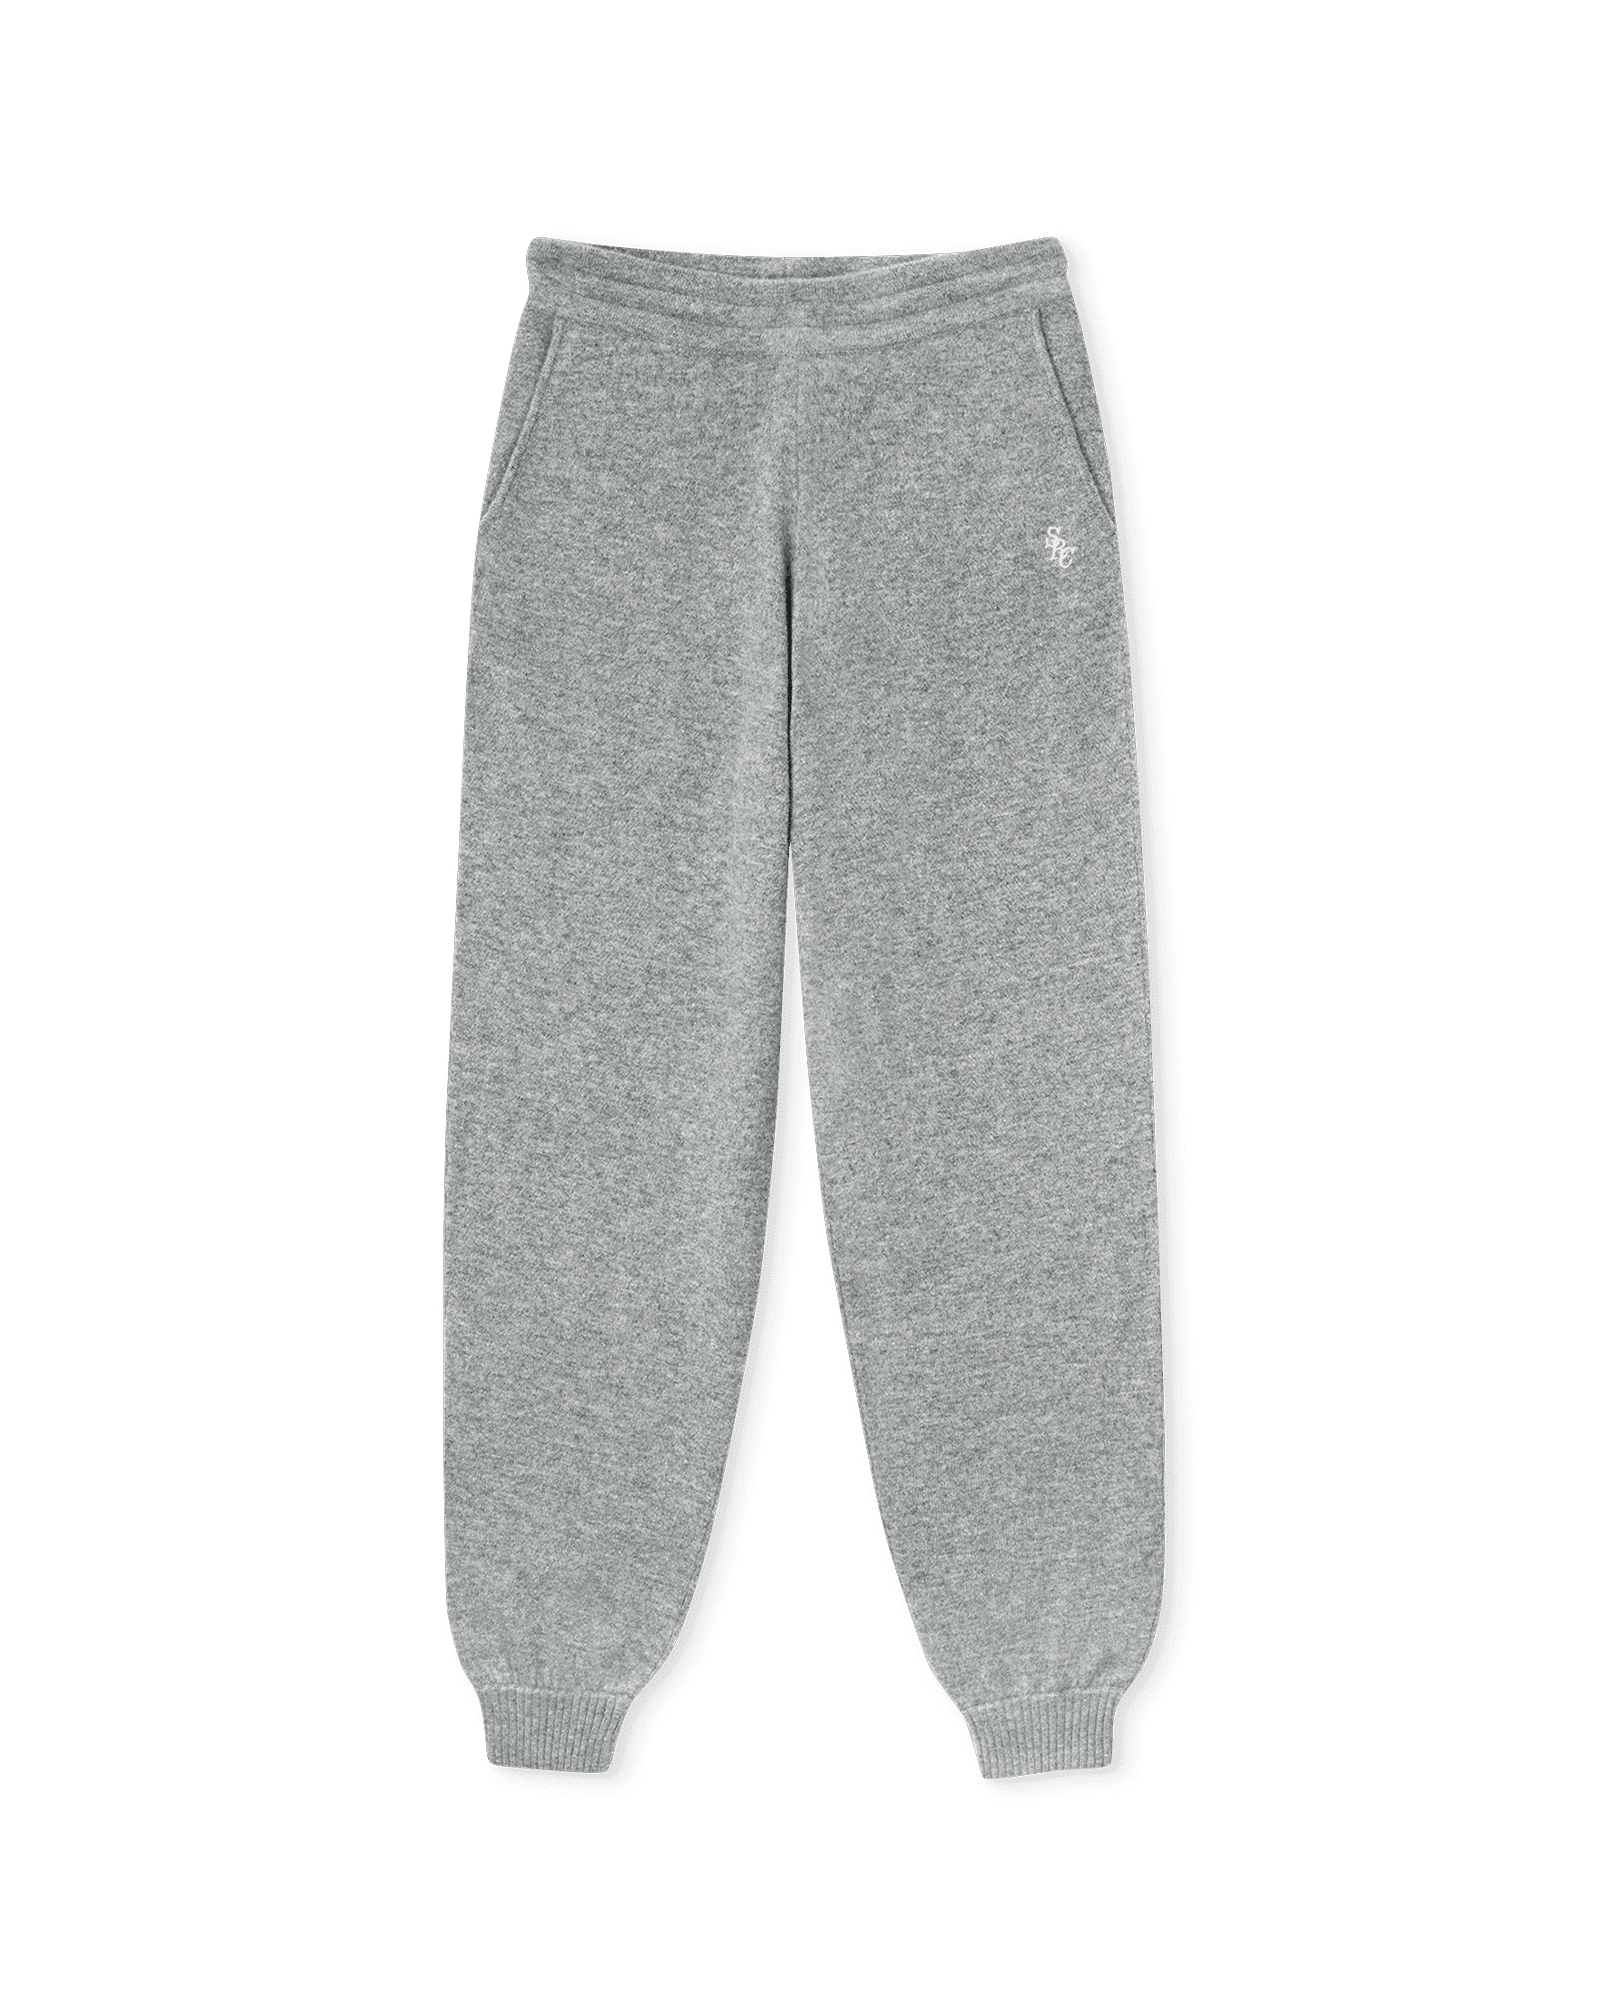 $450 TSE For Neiman Marcus Men's Gray Recycled Cashmere Sweatpants Size  Large